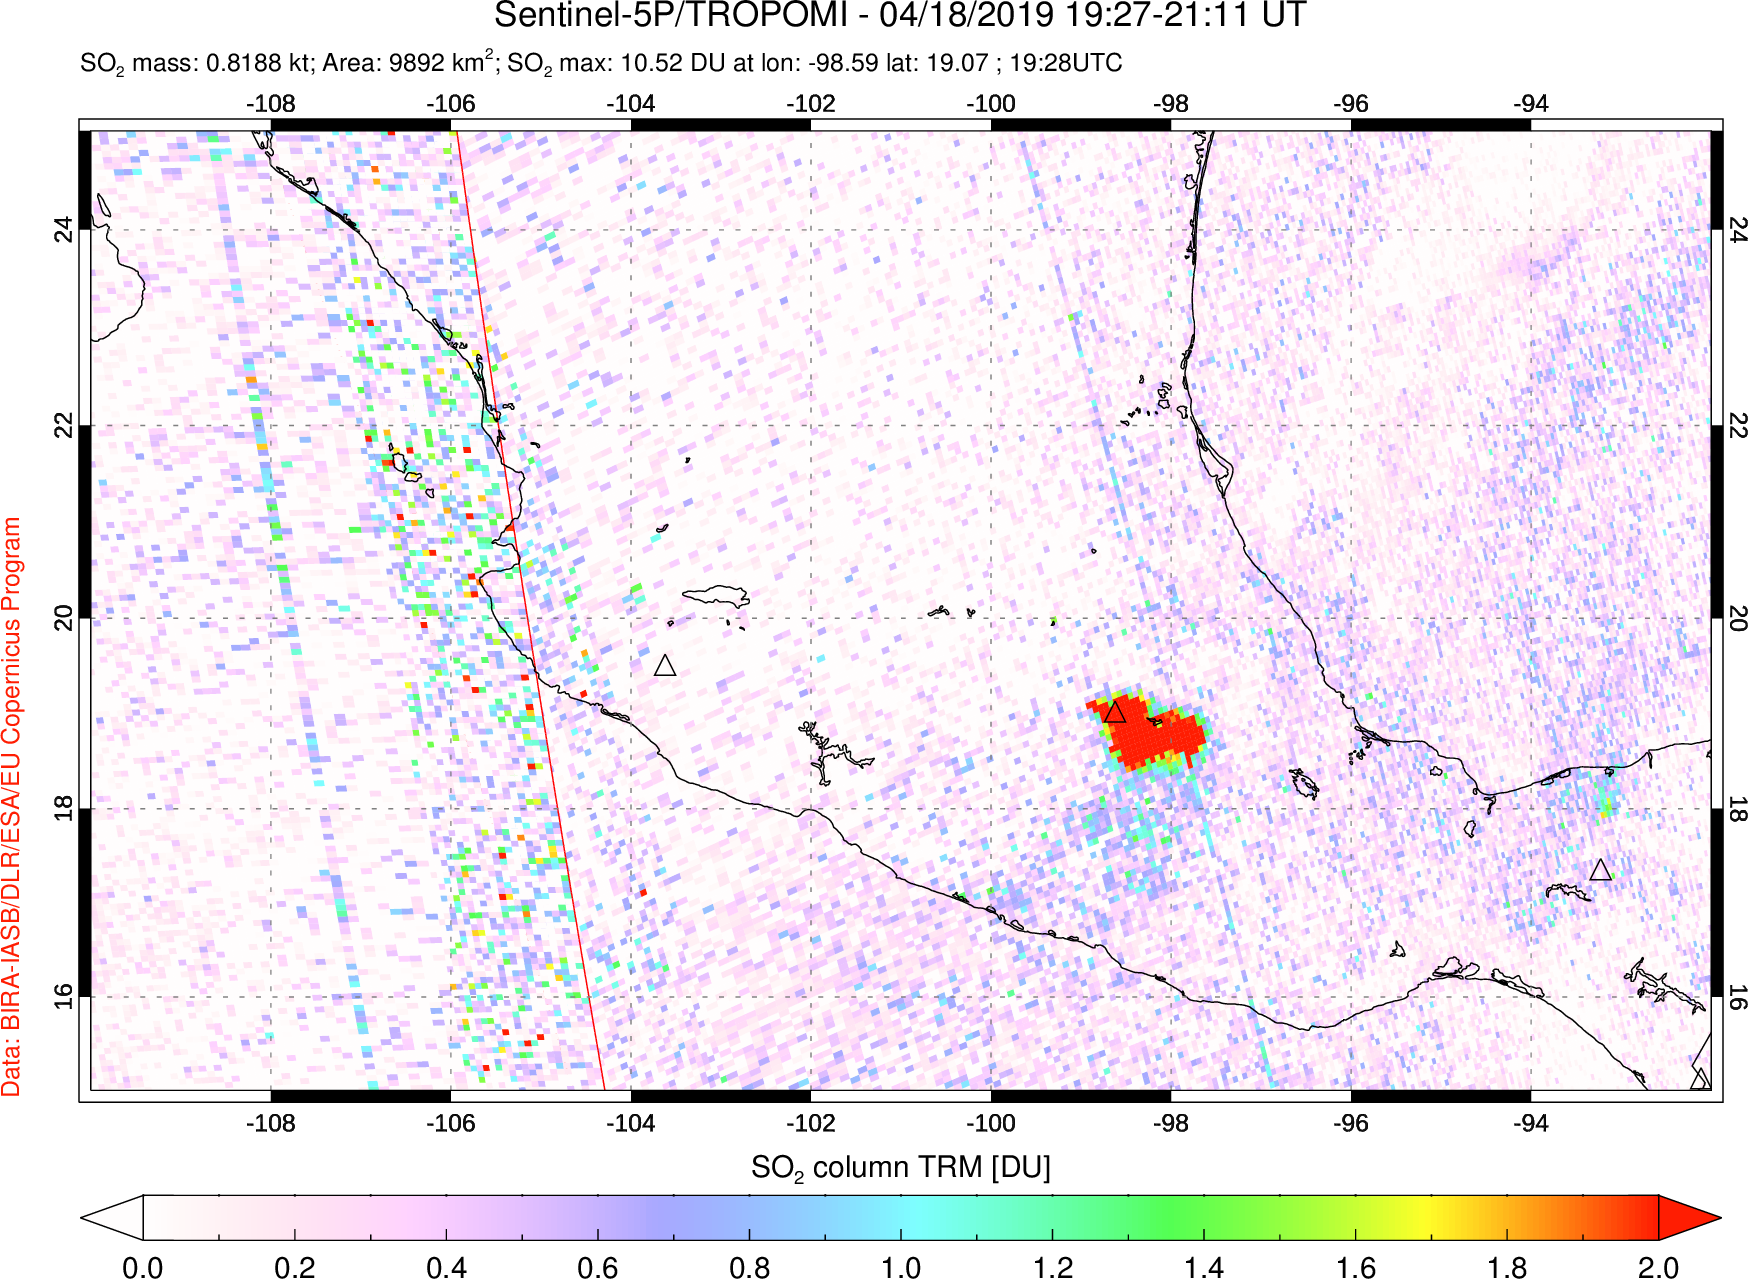 A sulfur dioxide image over Mexico on Apr 18, 2019.